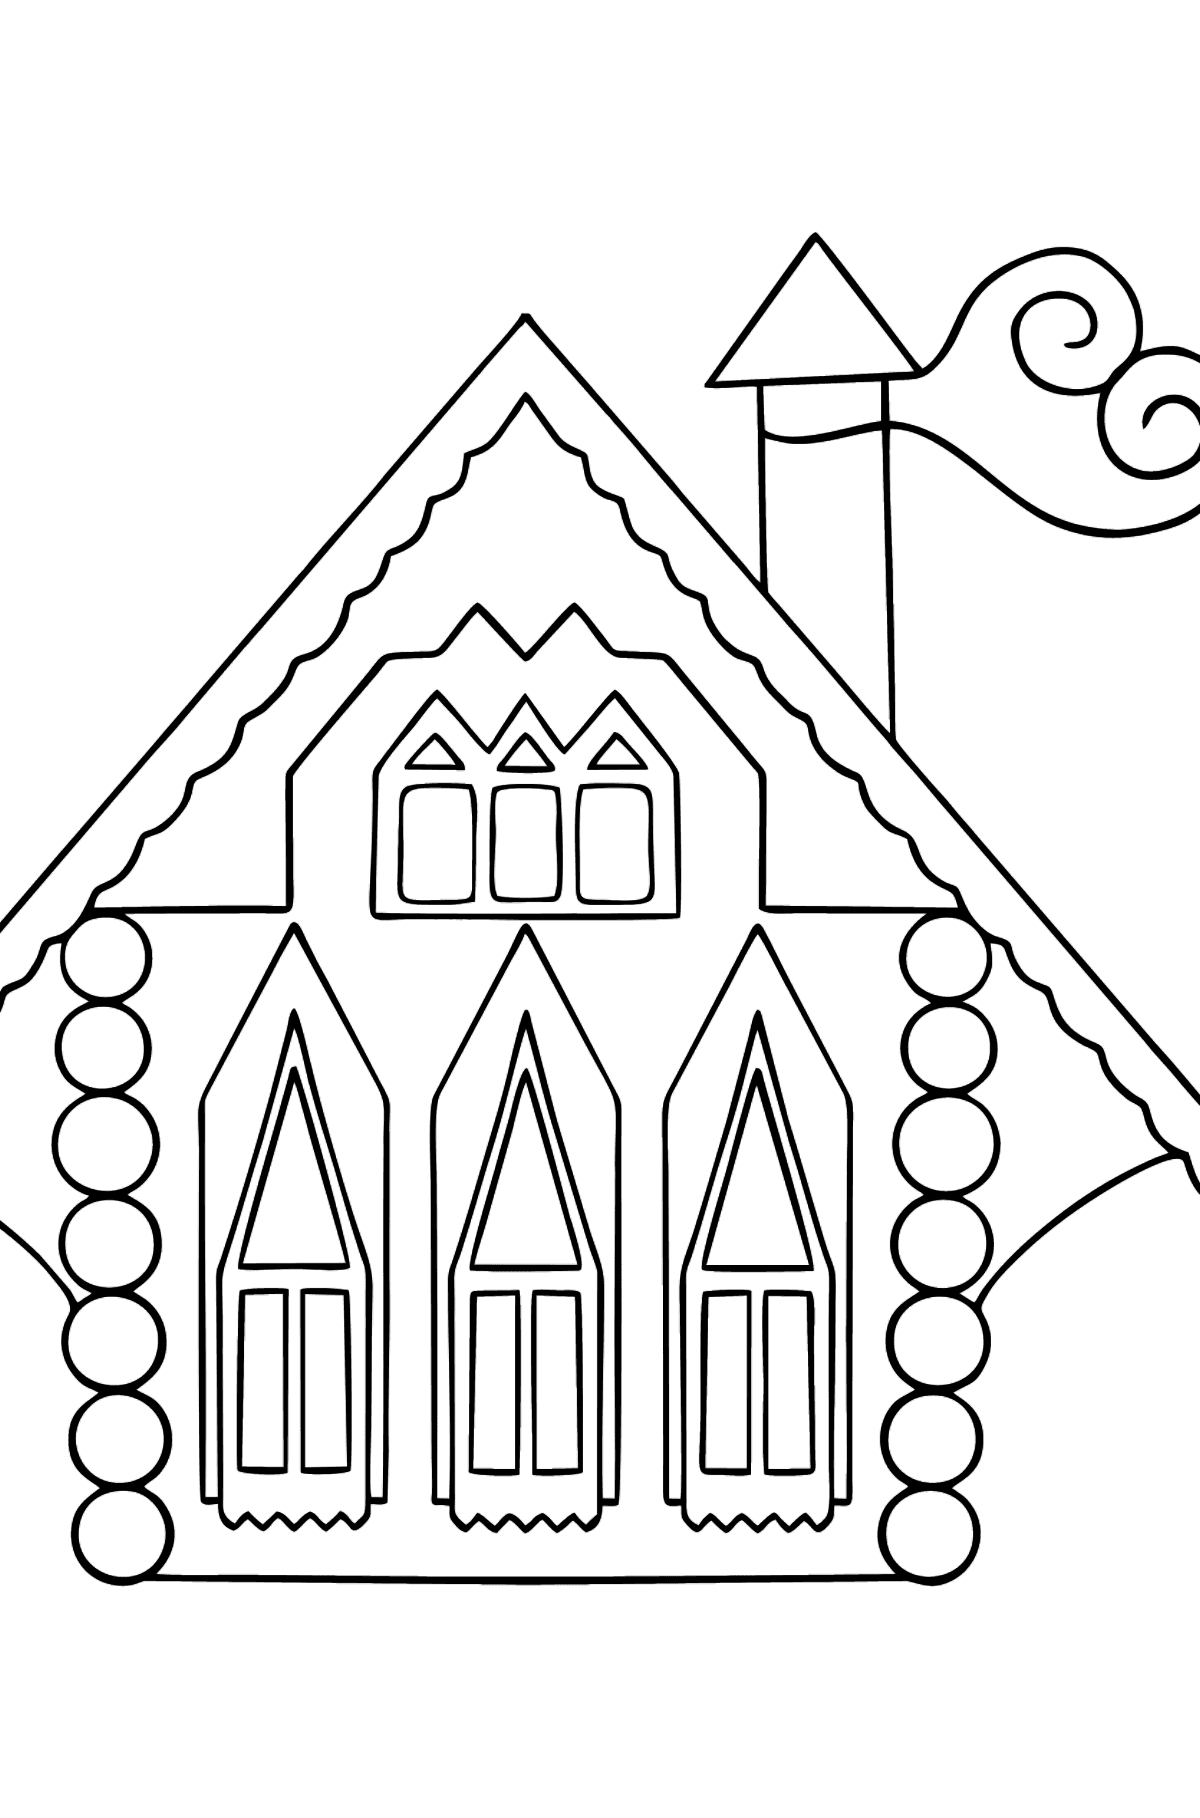 Rainbow House Coloring Page (difficult) - Coloring Pages for Kids